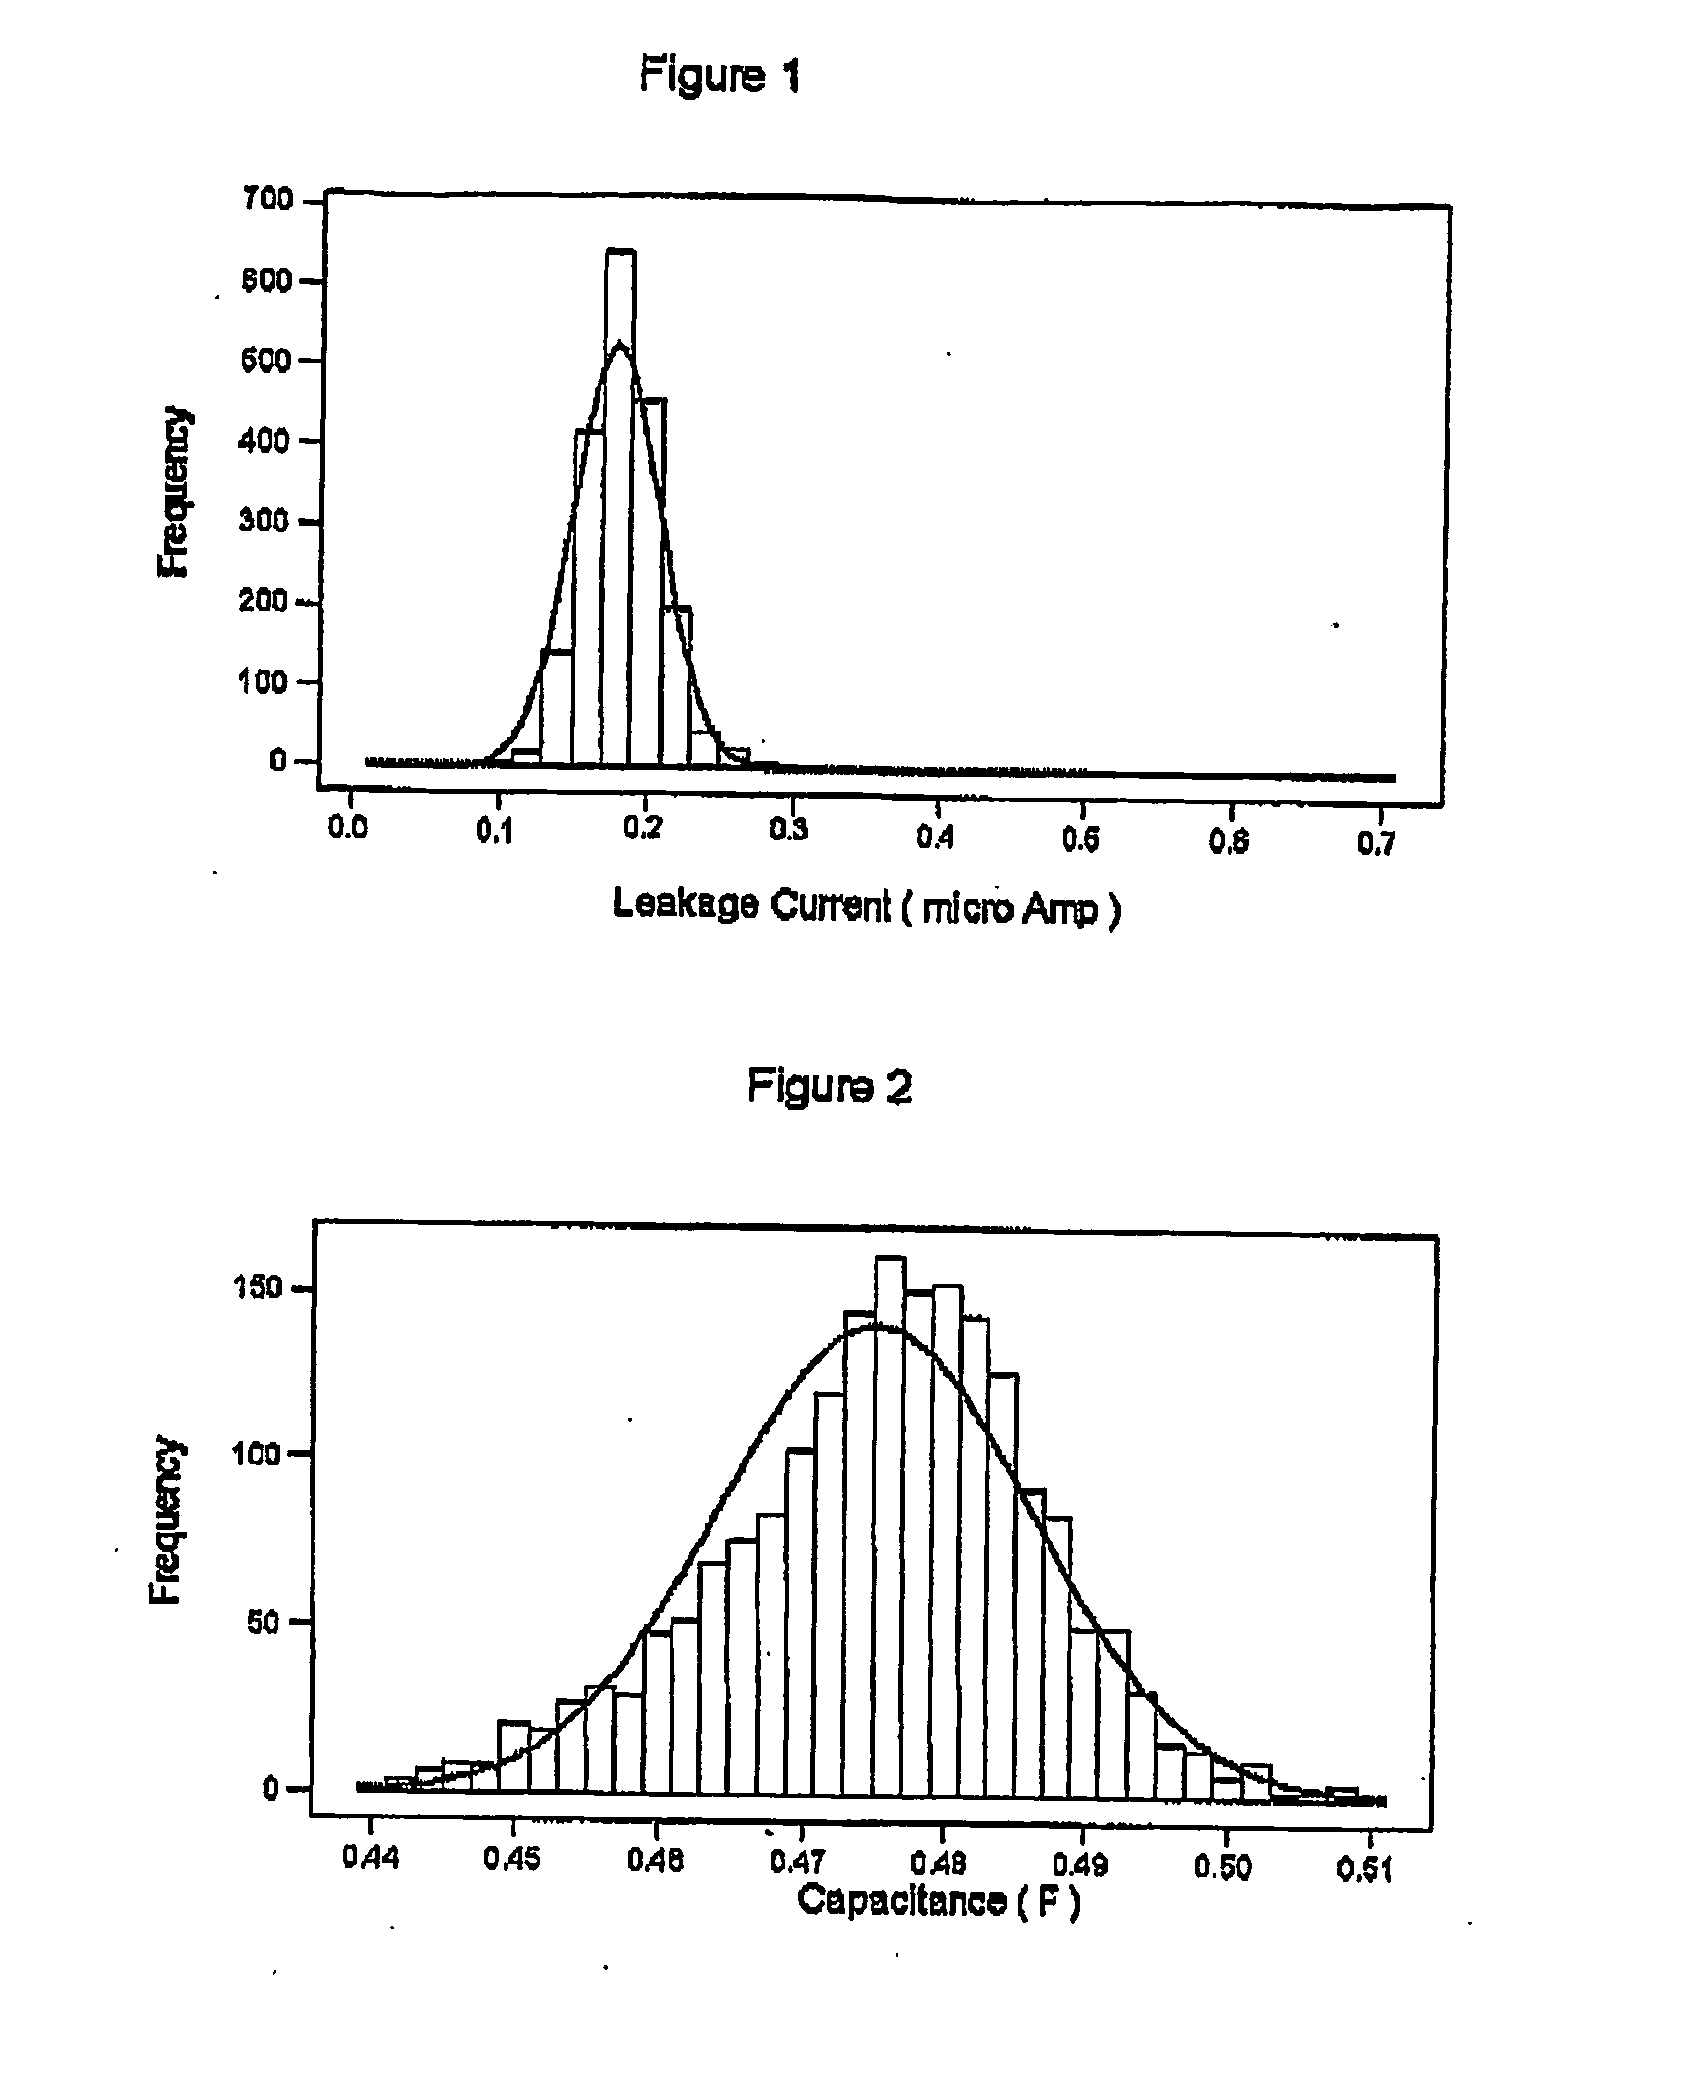 Resistive balance for an energy storage device